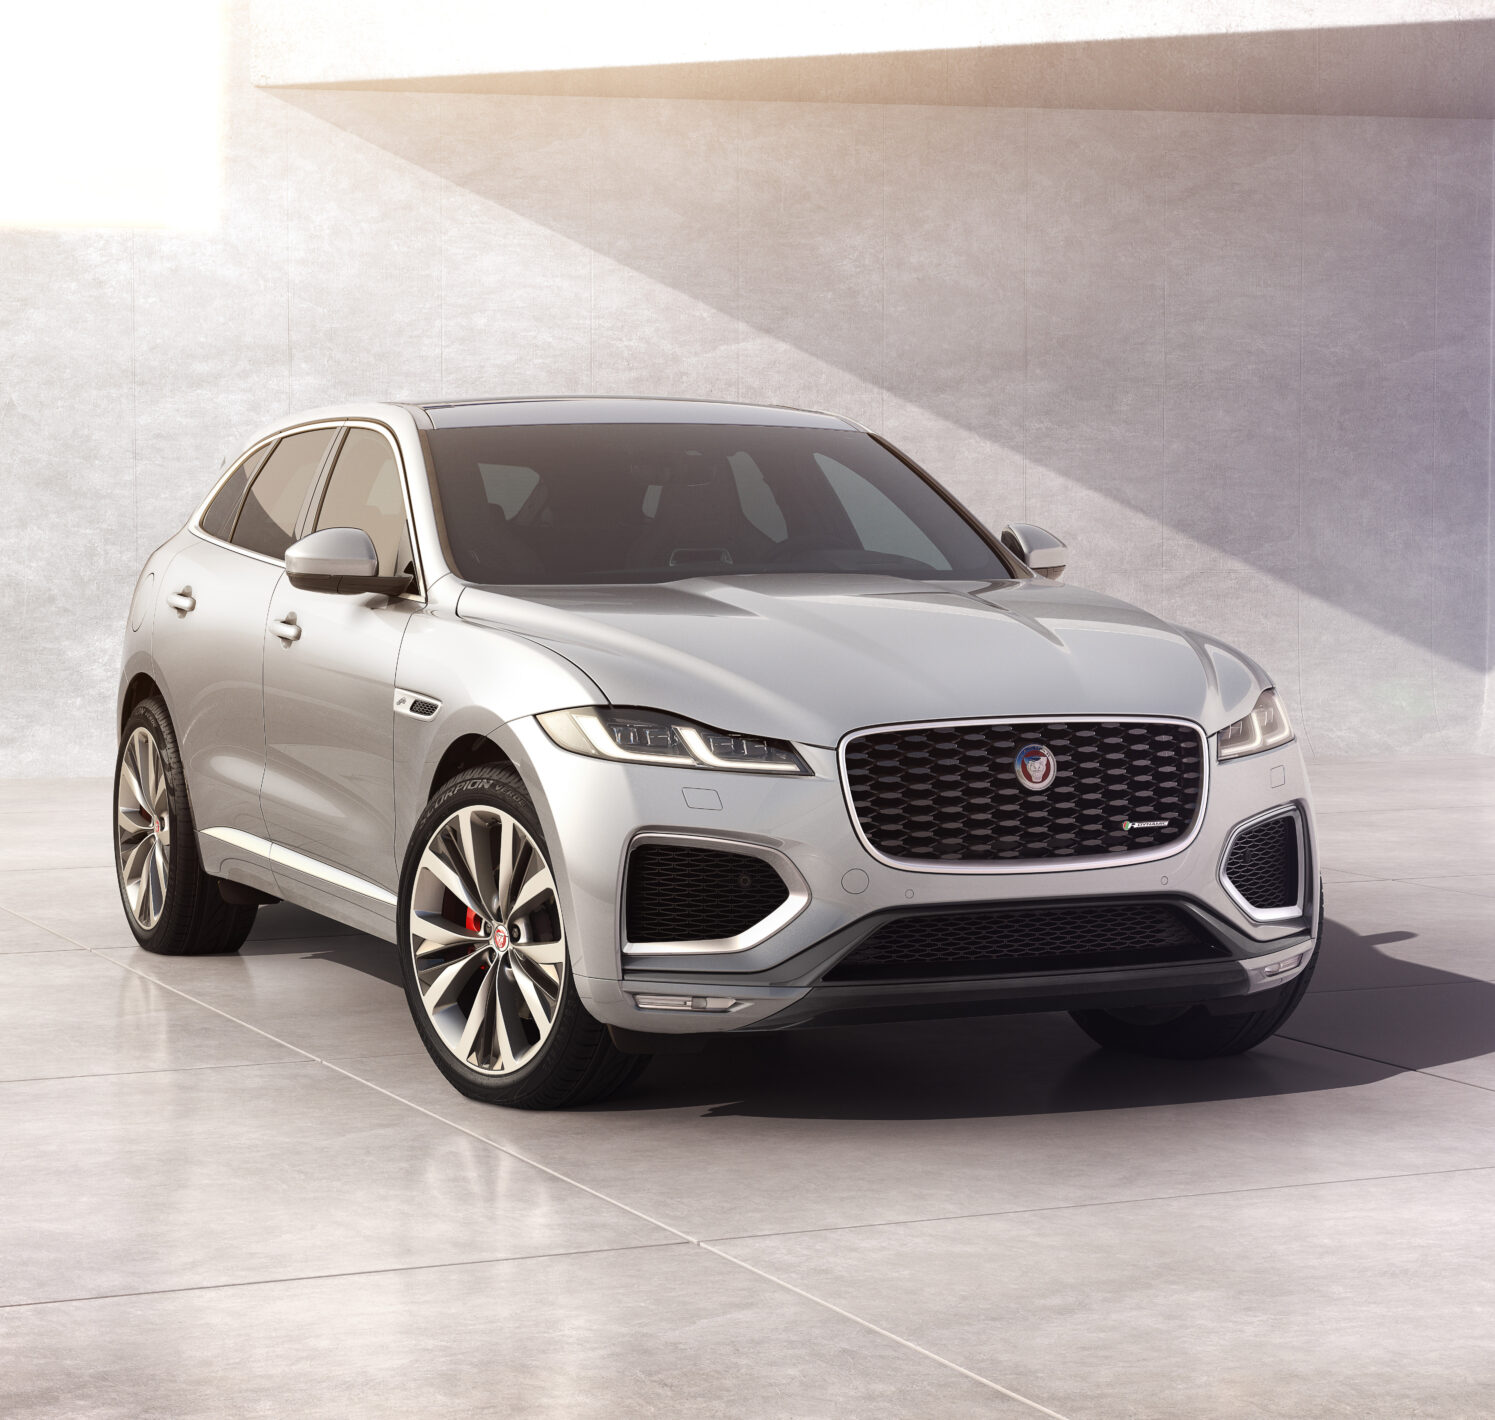 https://autofilter.sk/assets/images/f-pace/gallery/Jag_F-PACE_22MY_02_R-Dynamic_Exterior_Front_3-4_110821.jpg - obrazok